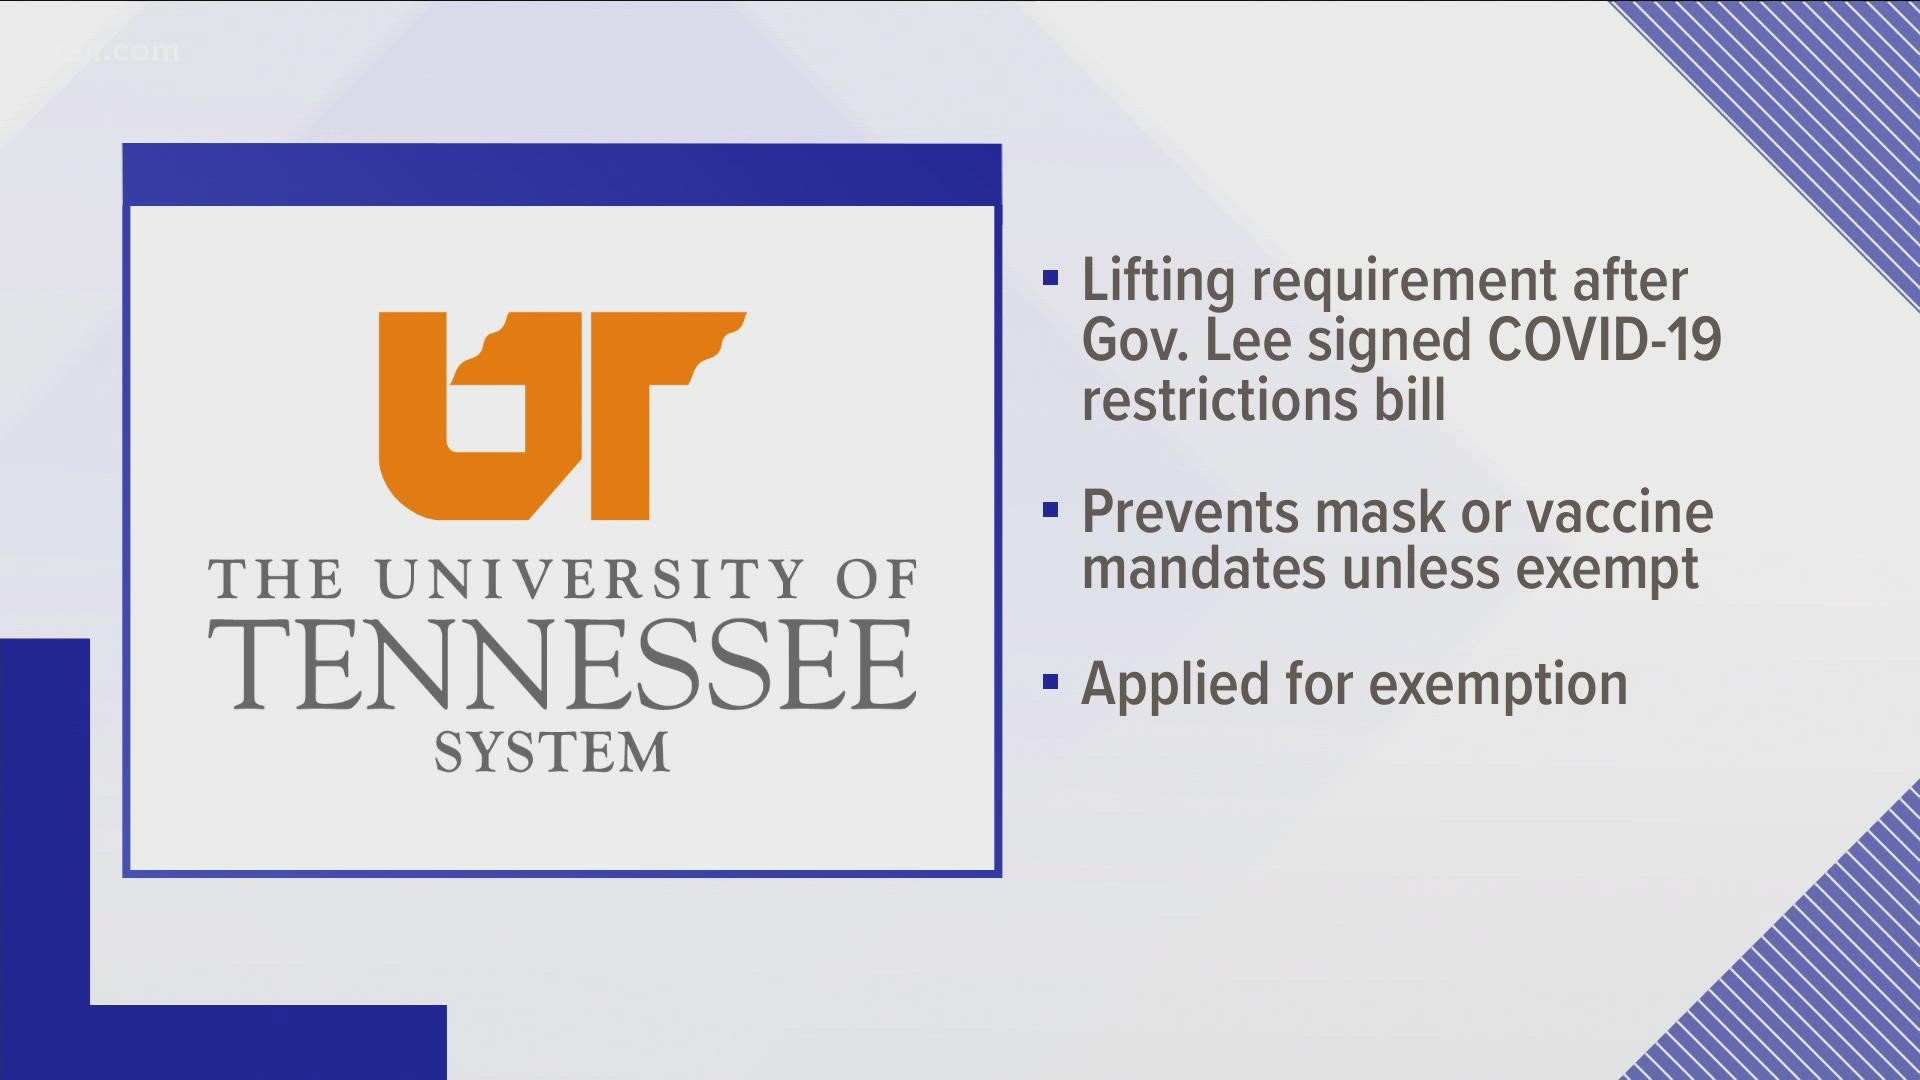 Boyd says the UT System has also applied for an exemption for employees with federal contracts.